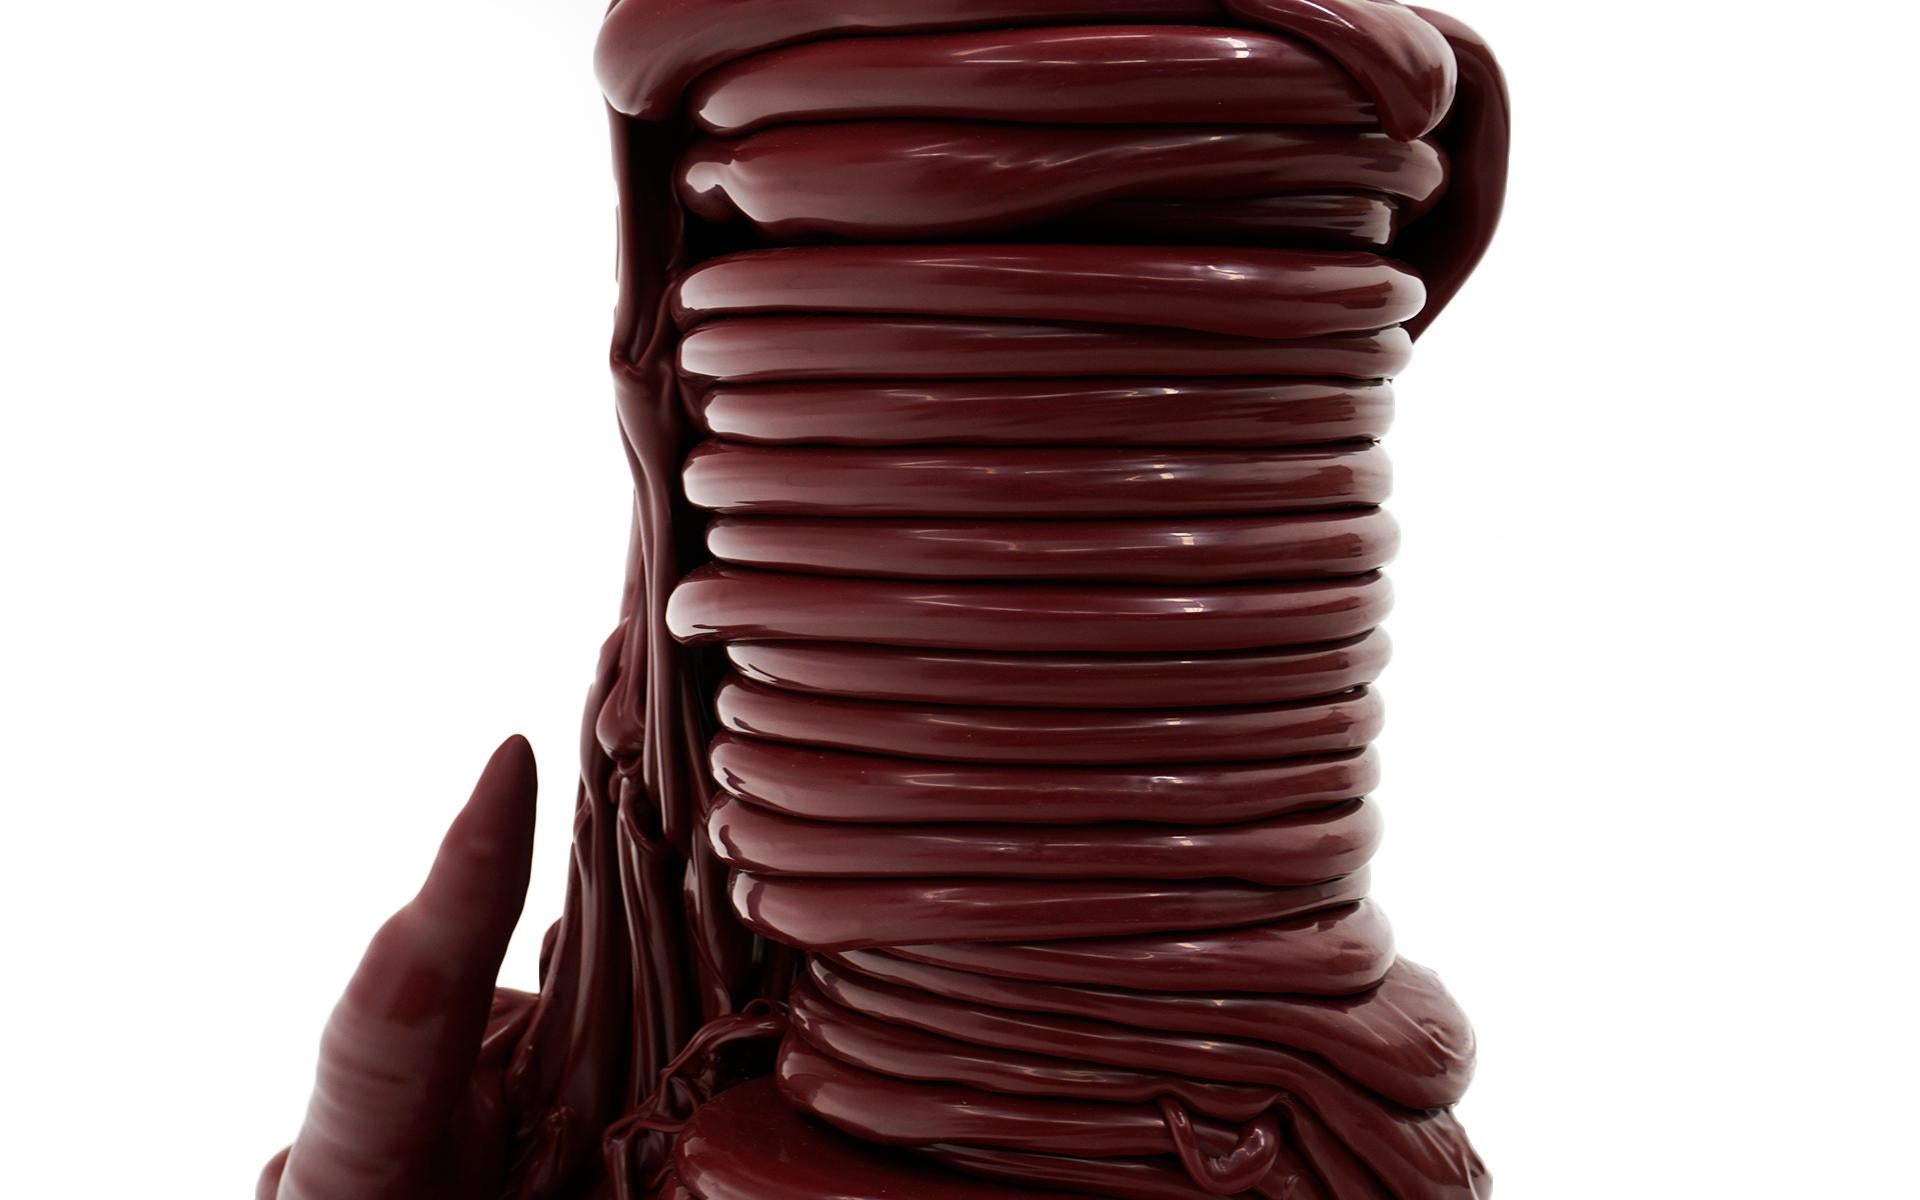 Contemporary Roxy Paine Scumak, 2011, Maroon / Burgundy Color, Mint Condition, Signed For Sale